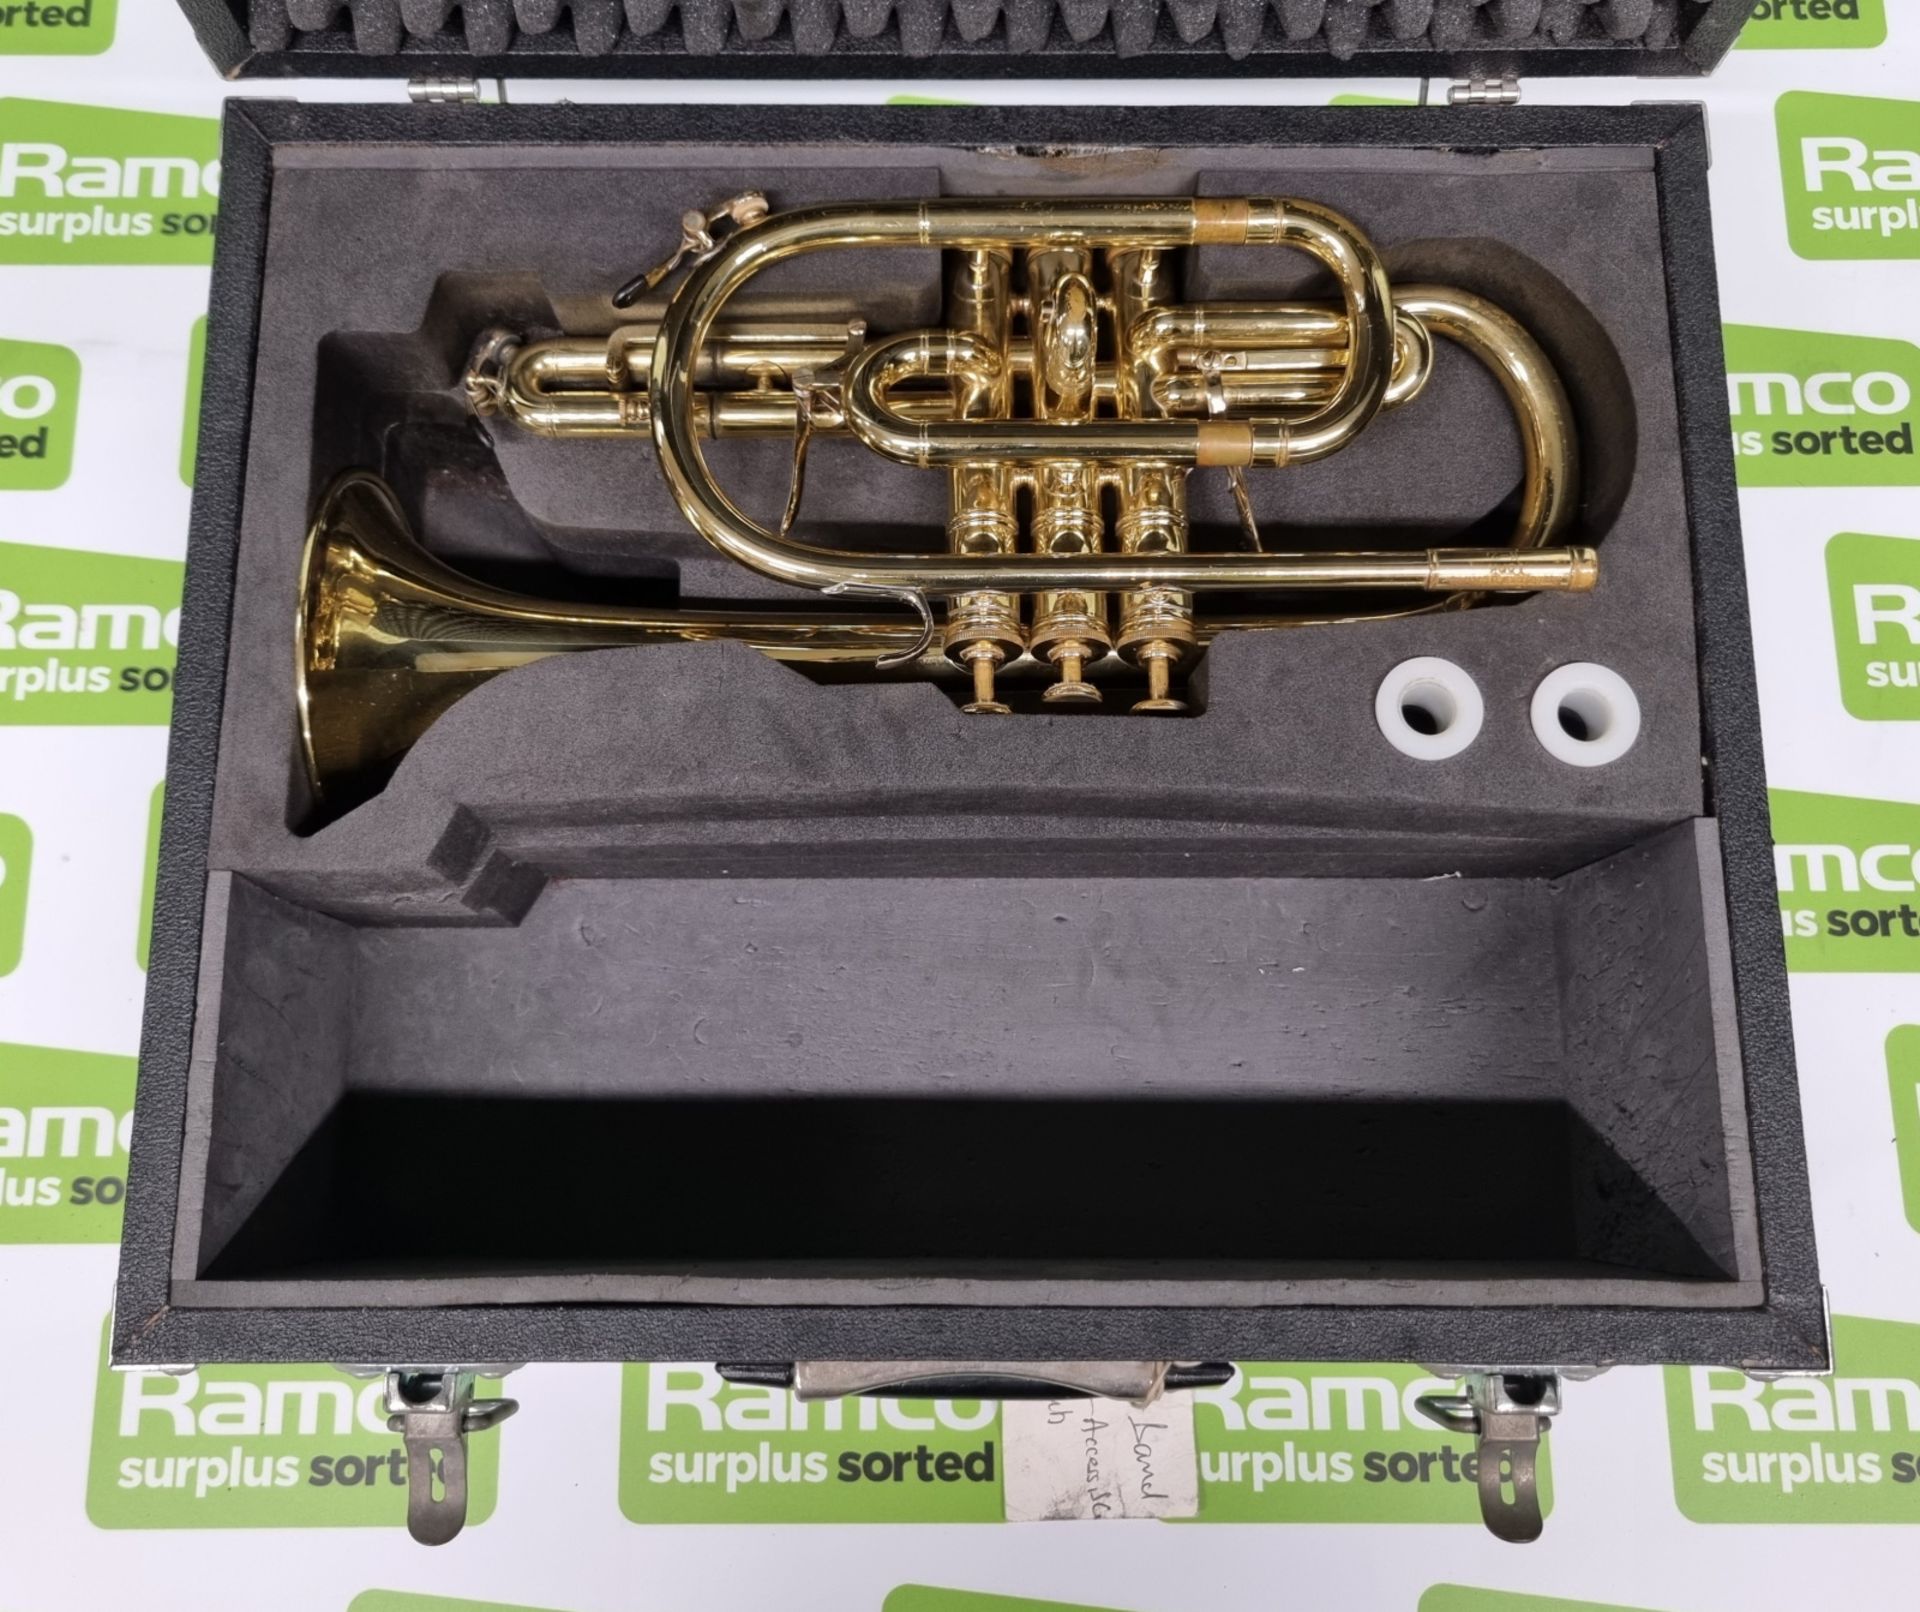 Smith-Watkins K-2 cornet in hard case with foam inlay - serial number: 1182 - Image 2 of 12